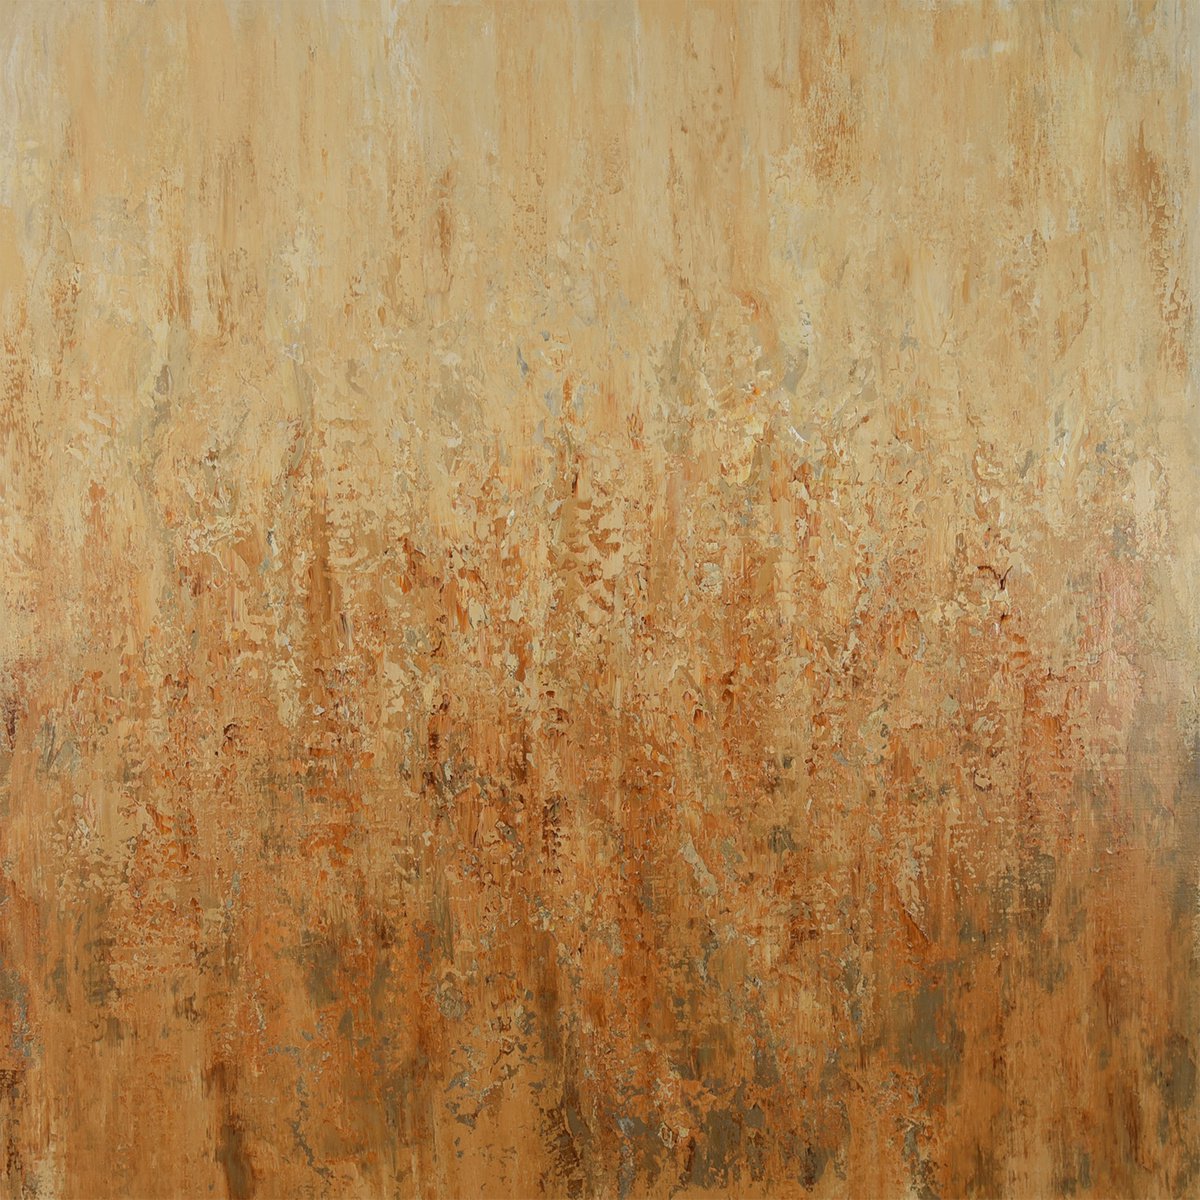 Soft Light - Textured Tonal Abstract Field by Suzanne Vaughan